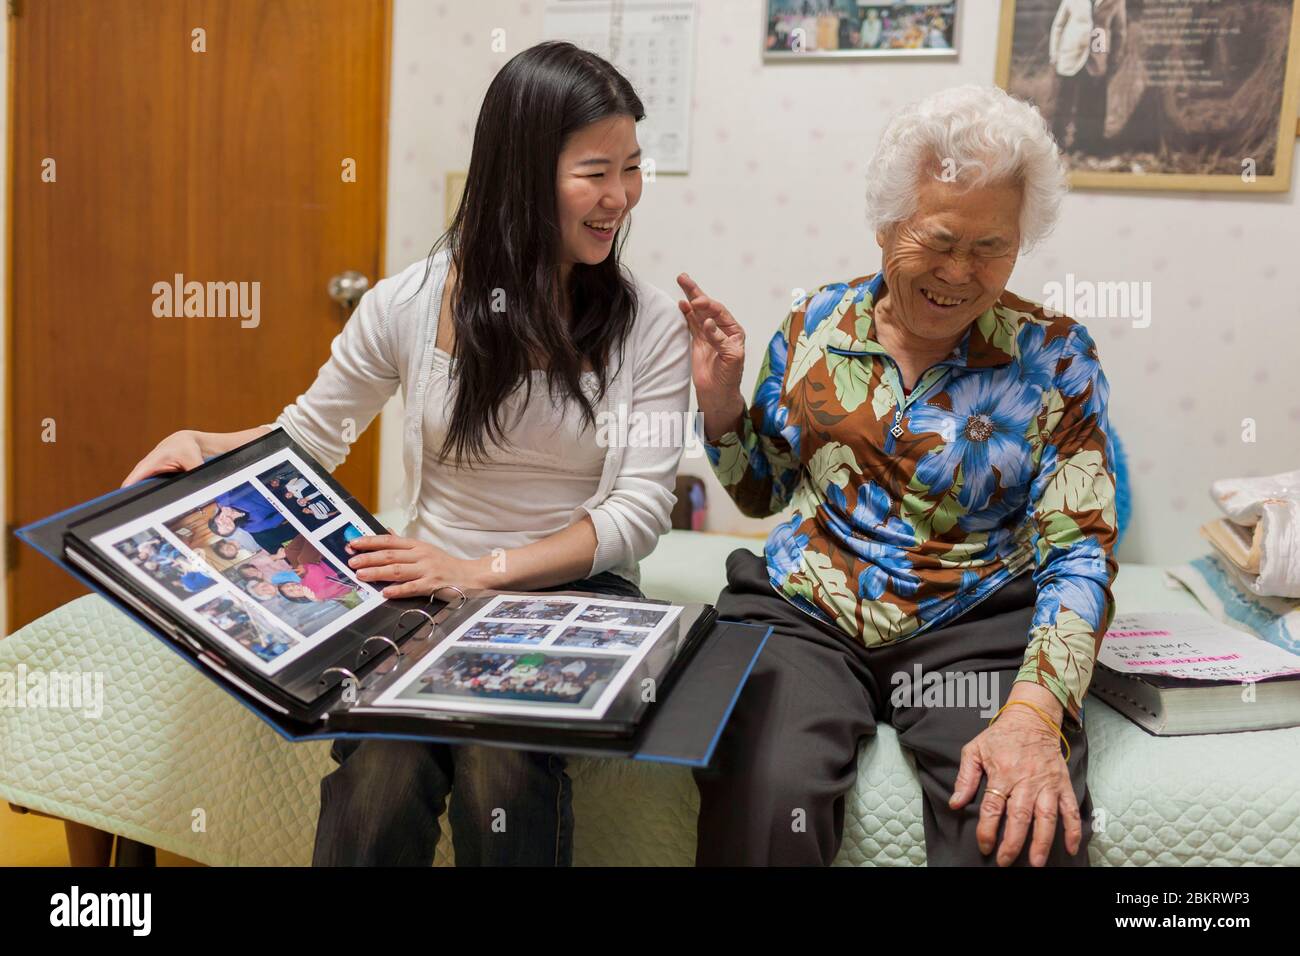 South Korea, Gyeonggi Province, Gwangju, near Seoul, House of Sharing, young Korean woman visits Yi Okseon in her room, meeting with surviving Comfort Women, sex slaves victims of Japanese soldiers, during photo